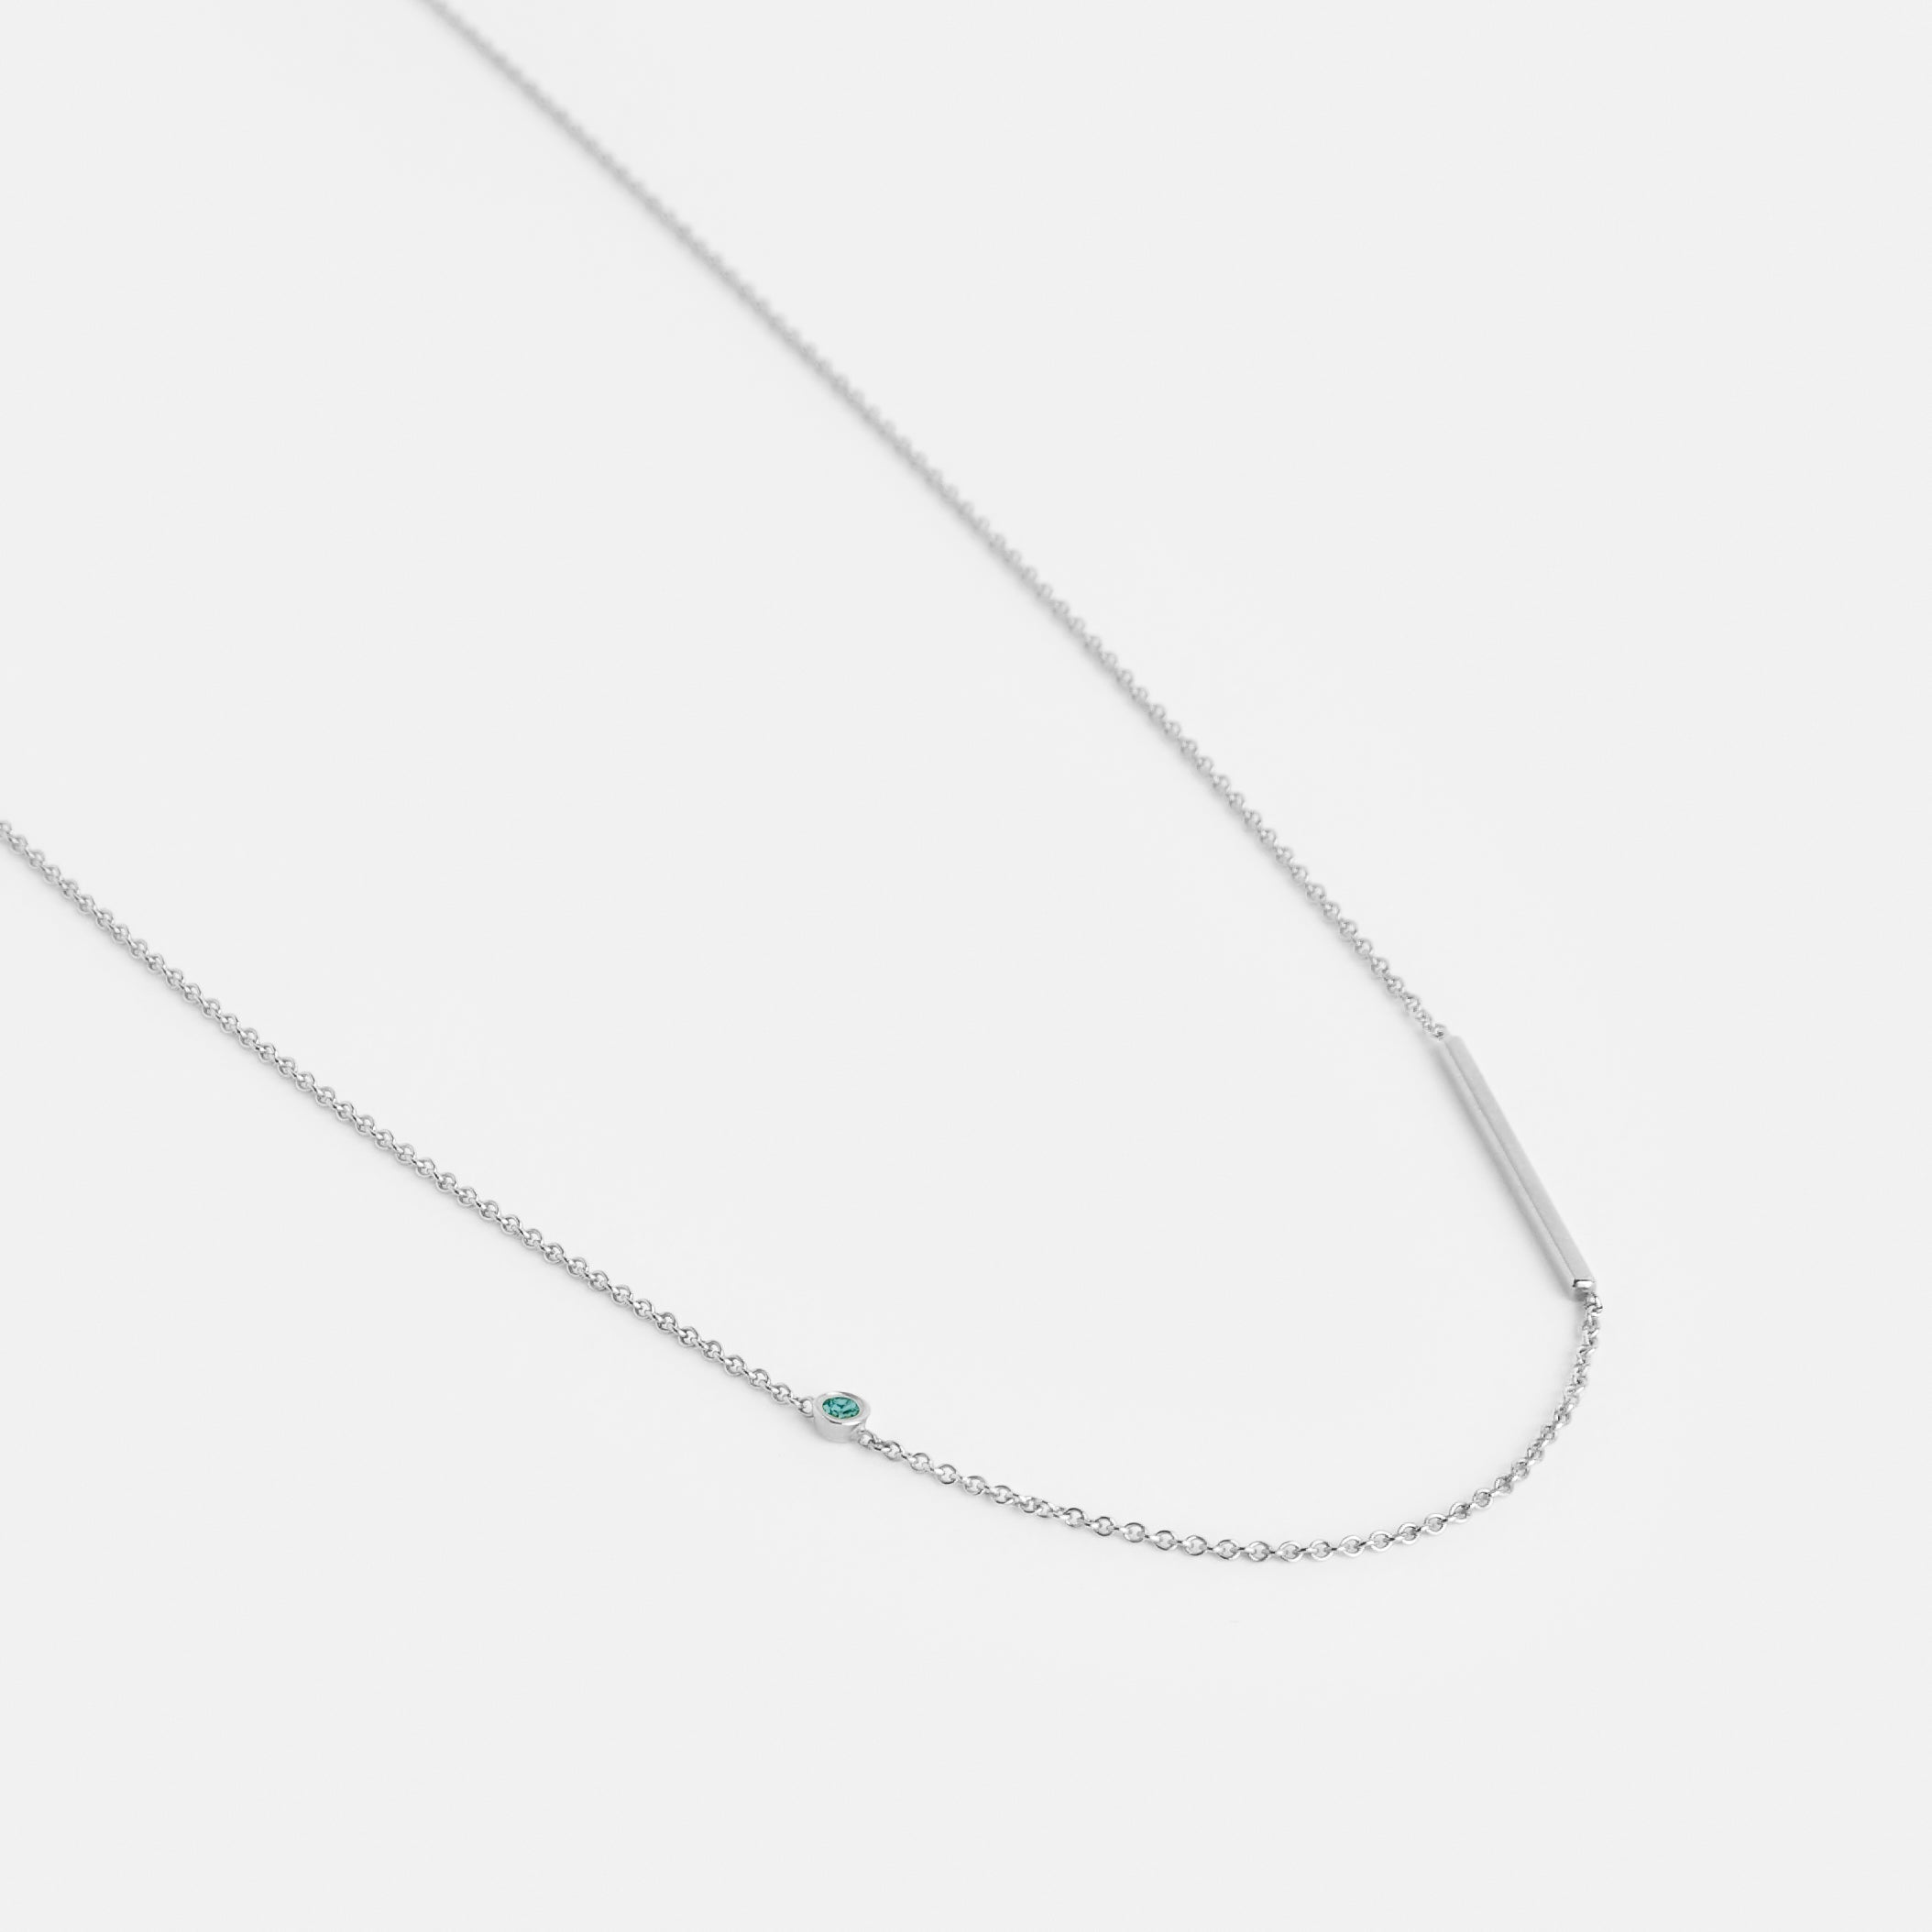 Iki Alternative Necklace in 14k White Gold set with Emerald By SHW Fine Jewelry NYC